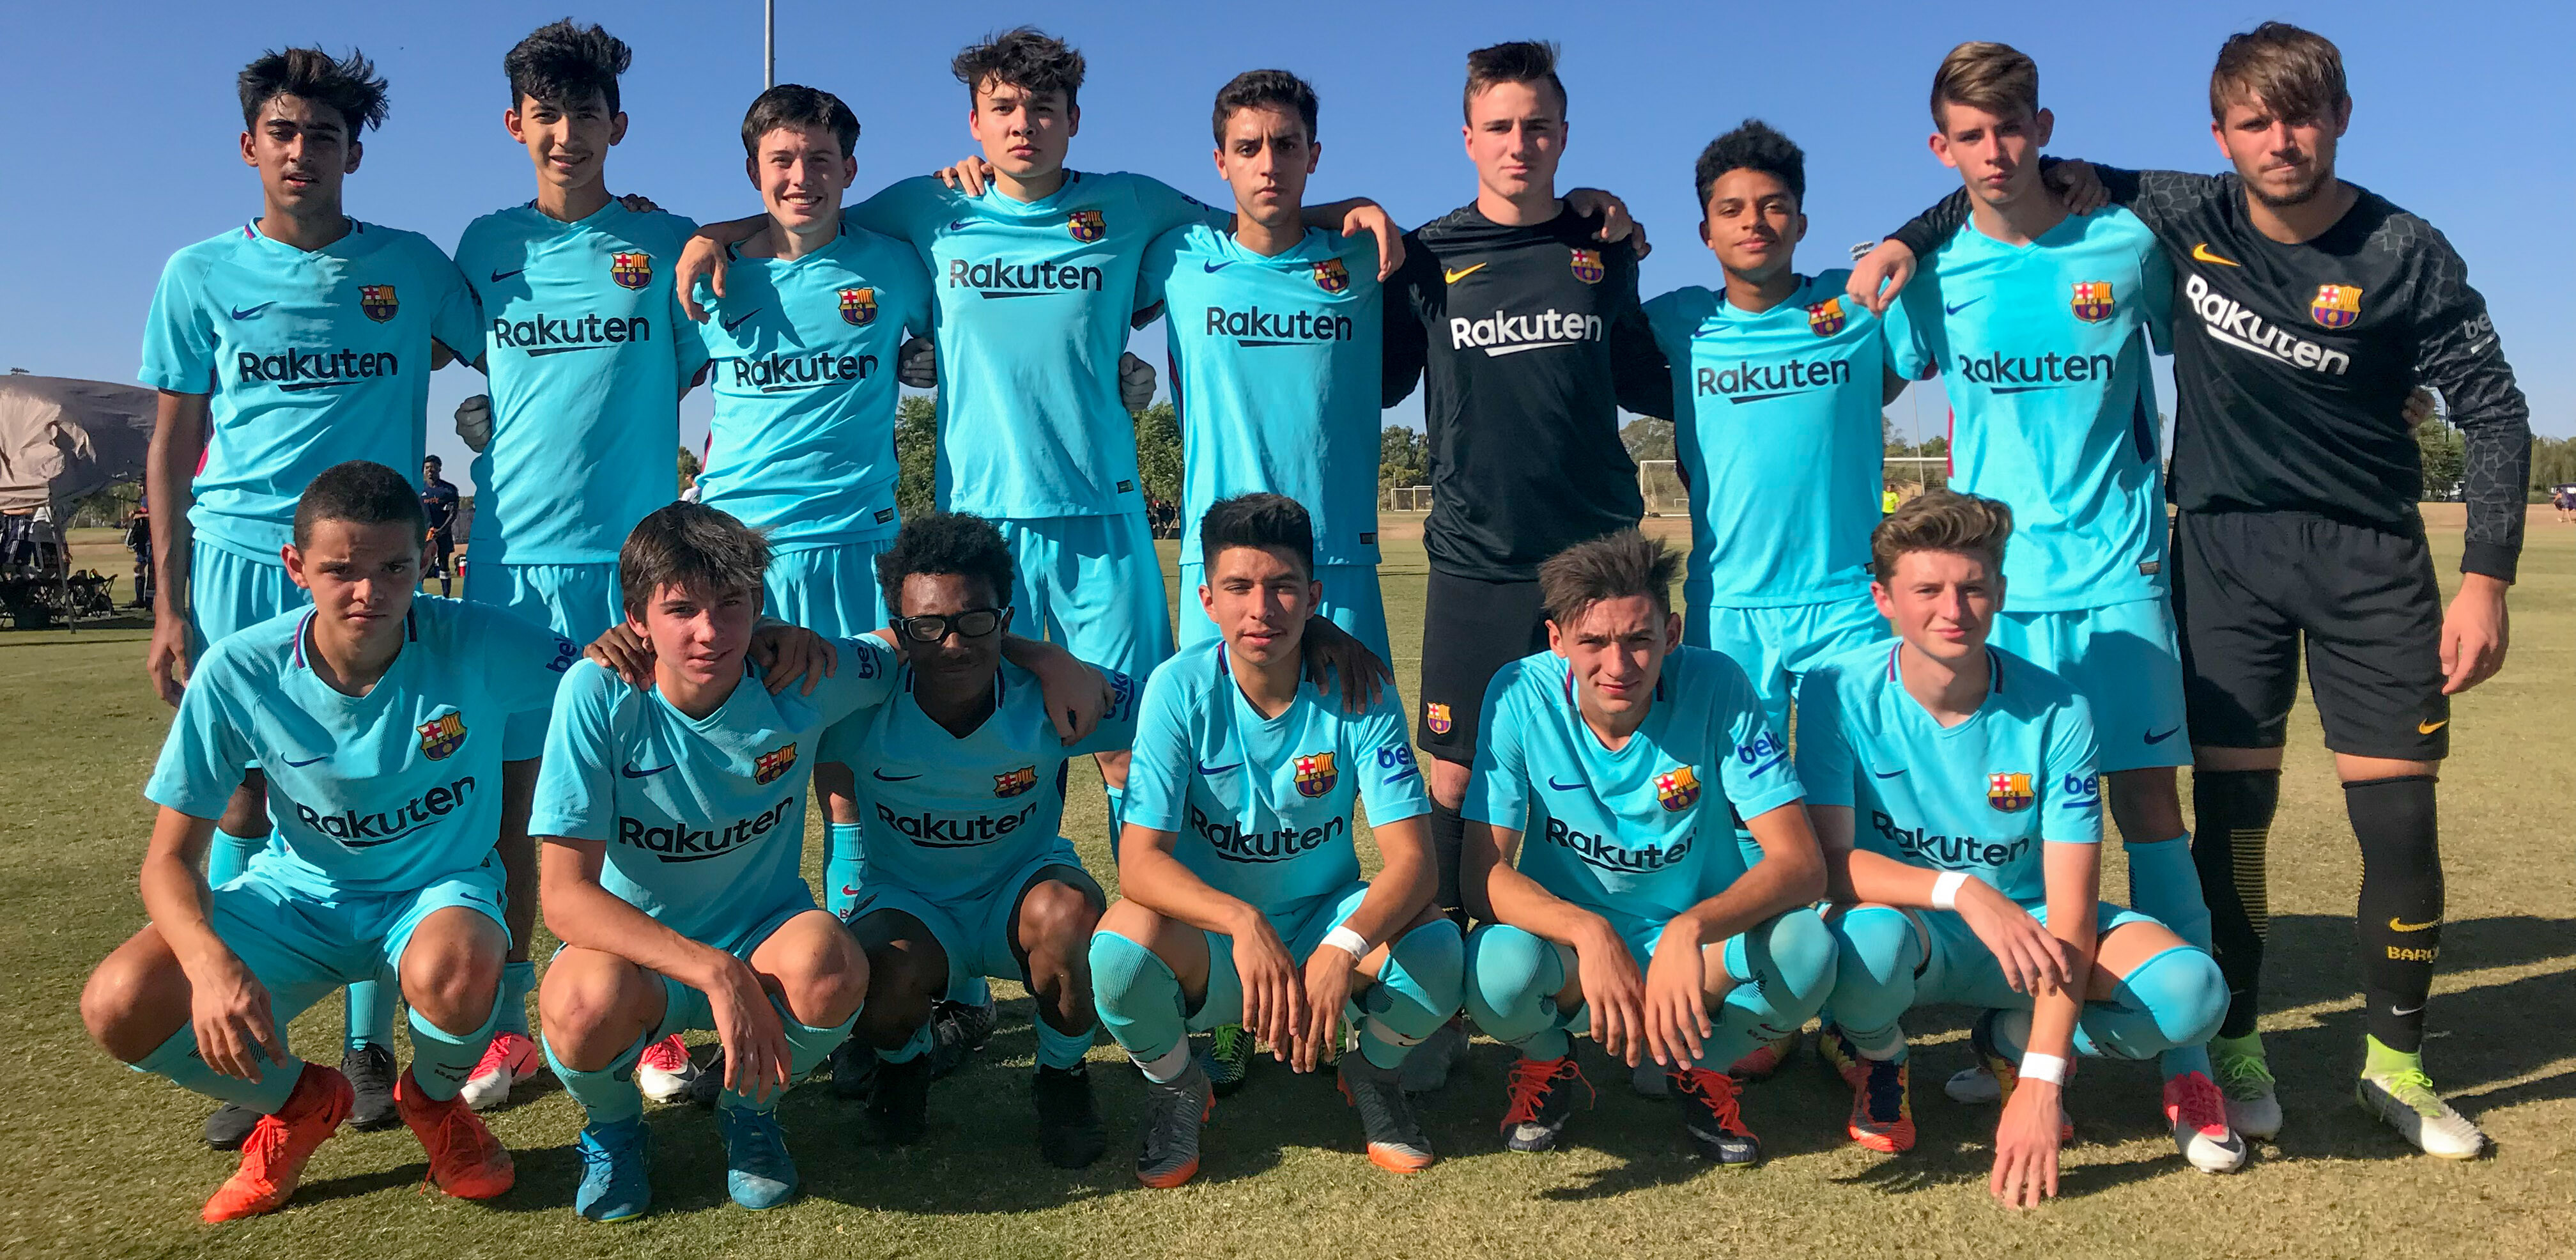 A Successful Weekend at Home for Barca Academy